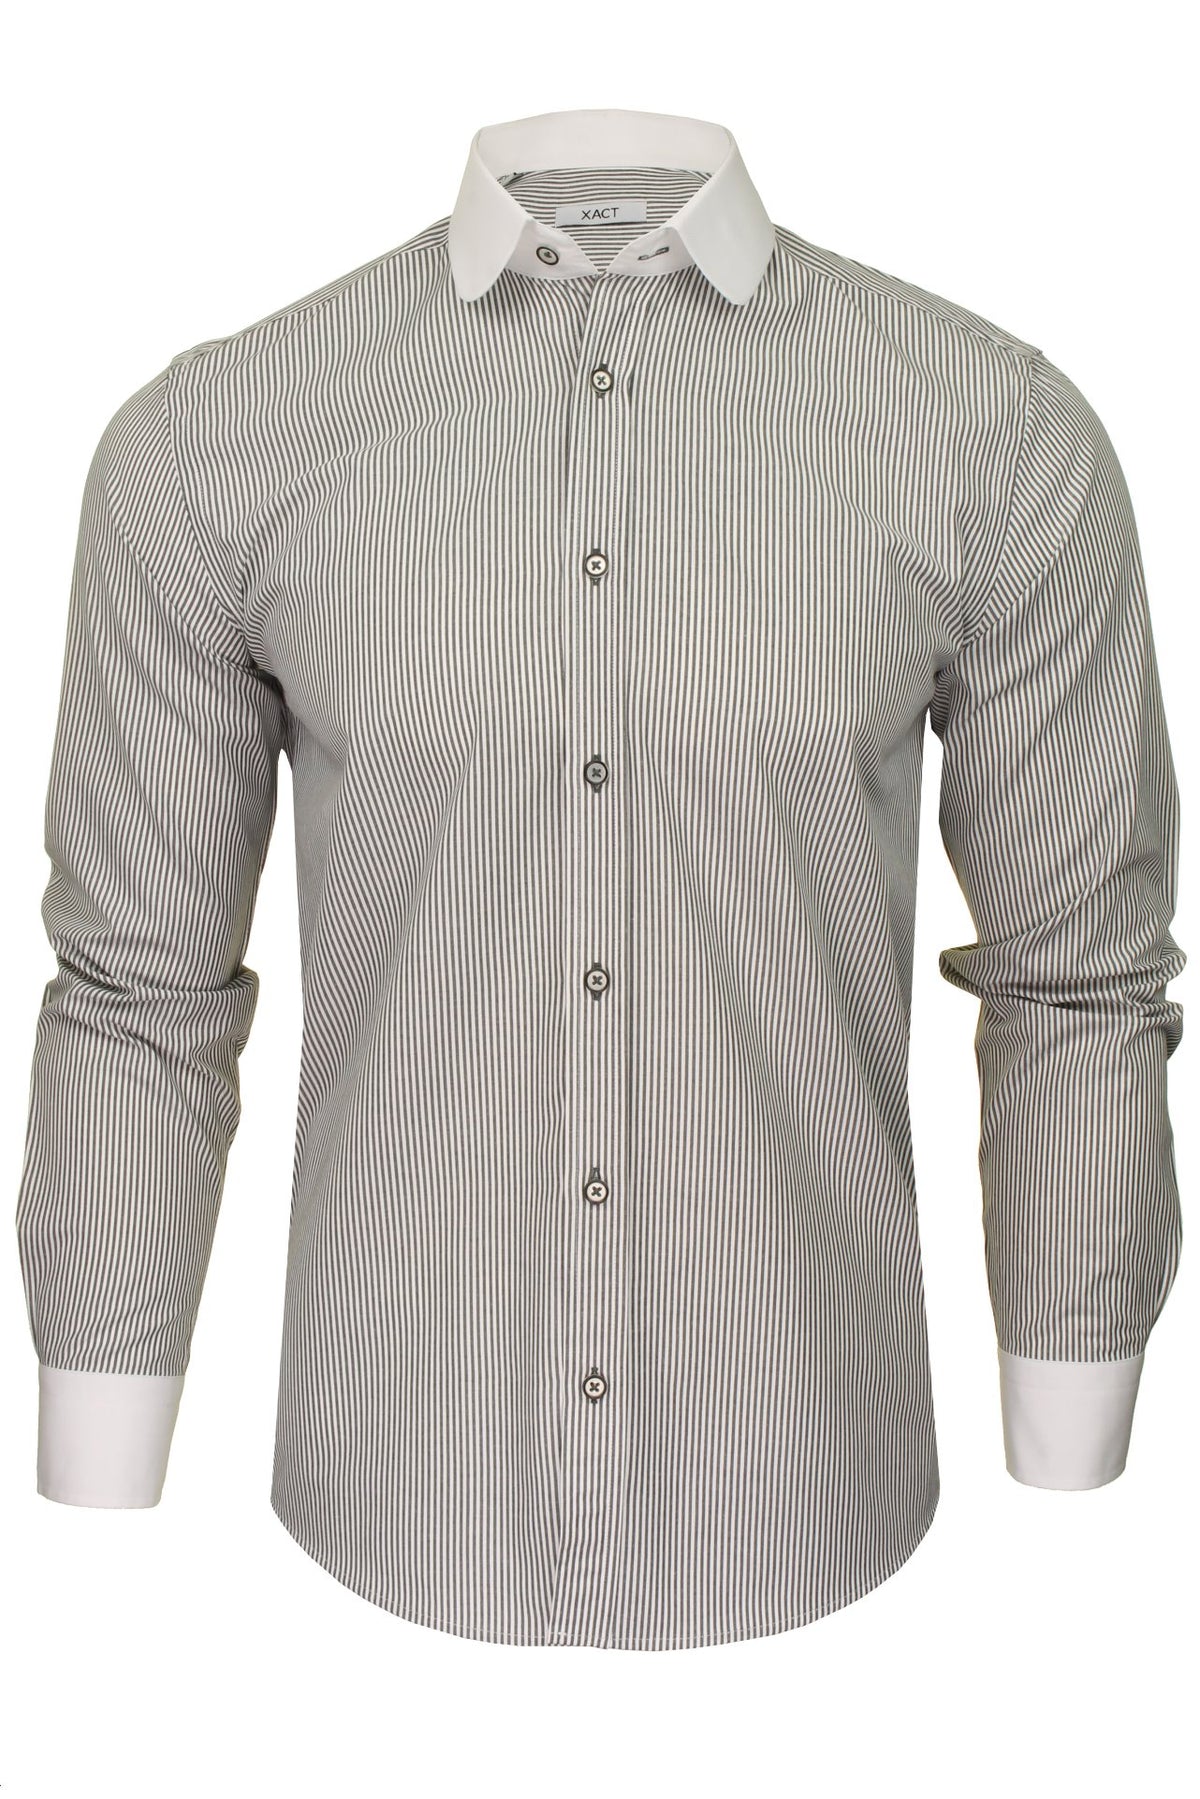 Xact Men's Long-Sleeved Striped Shirt with White Penny/Club Collar and White Cuffs, 01, Xsh1092, White Collar - Dark Grey Stripe